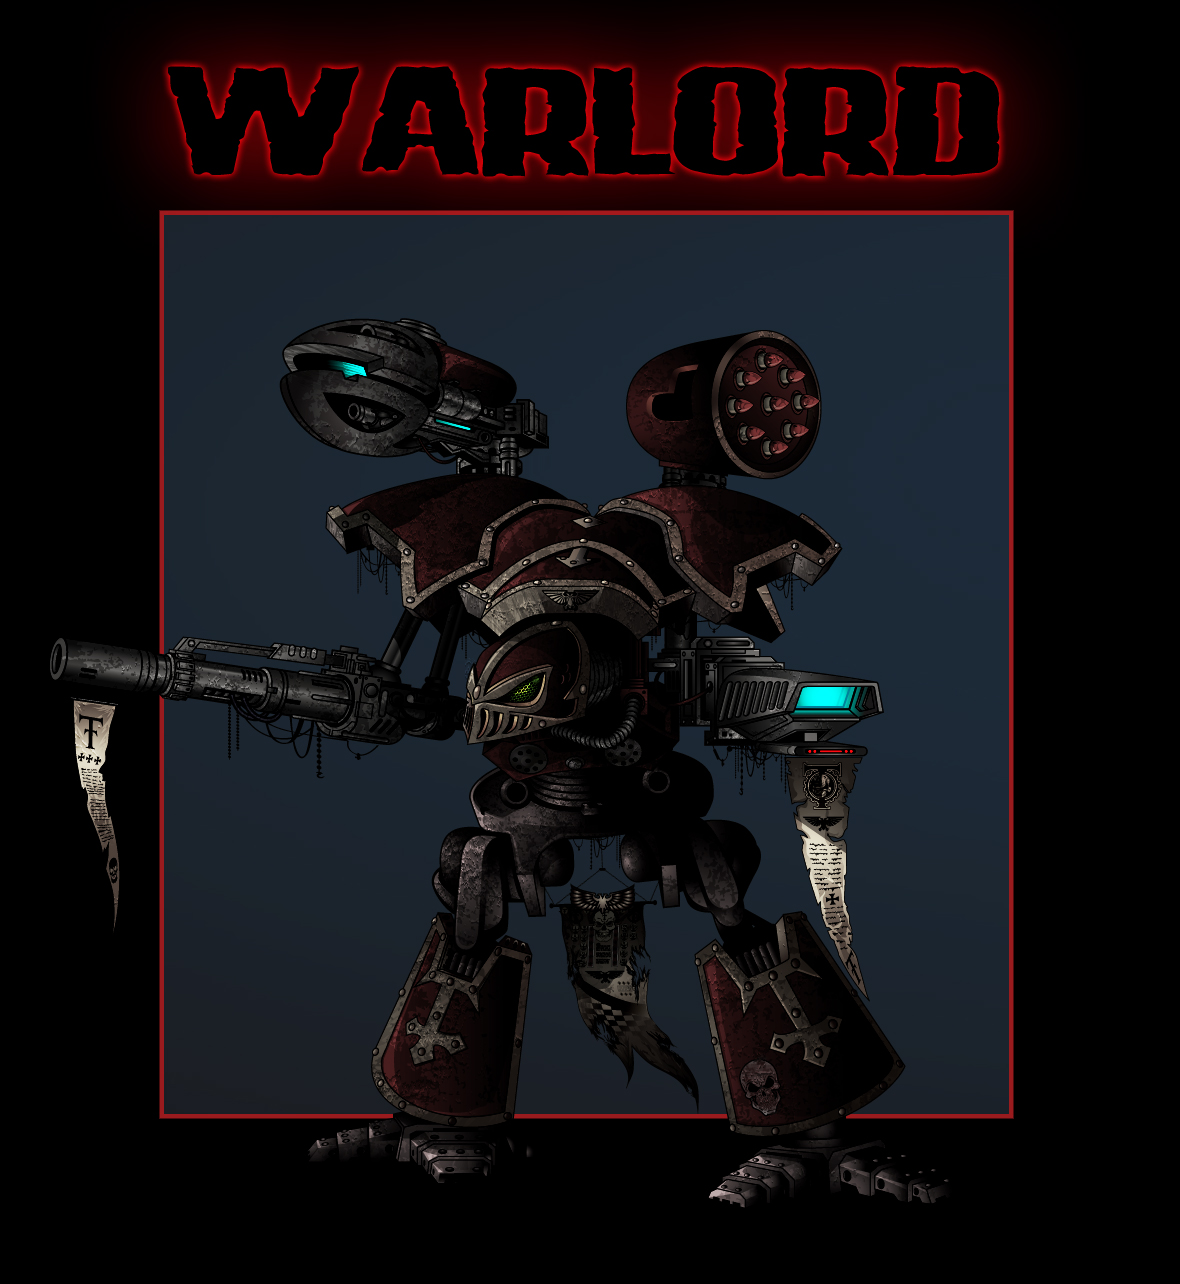 the_real_warlord_by_the_first_magelord-d2xvkhl.jpg